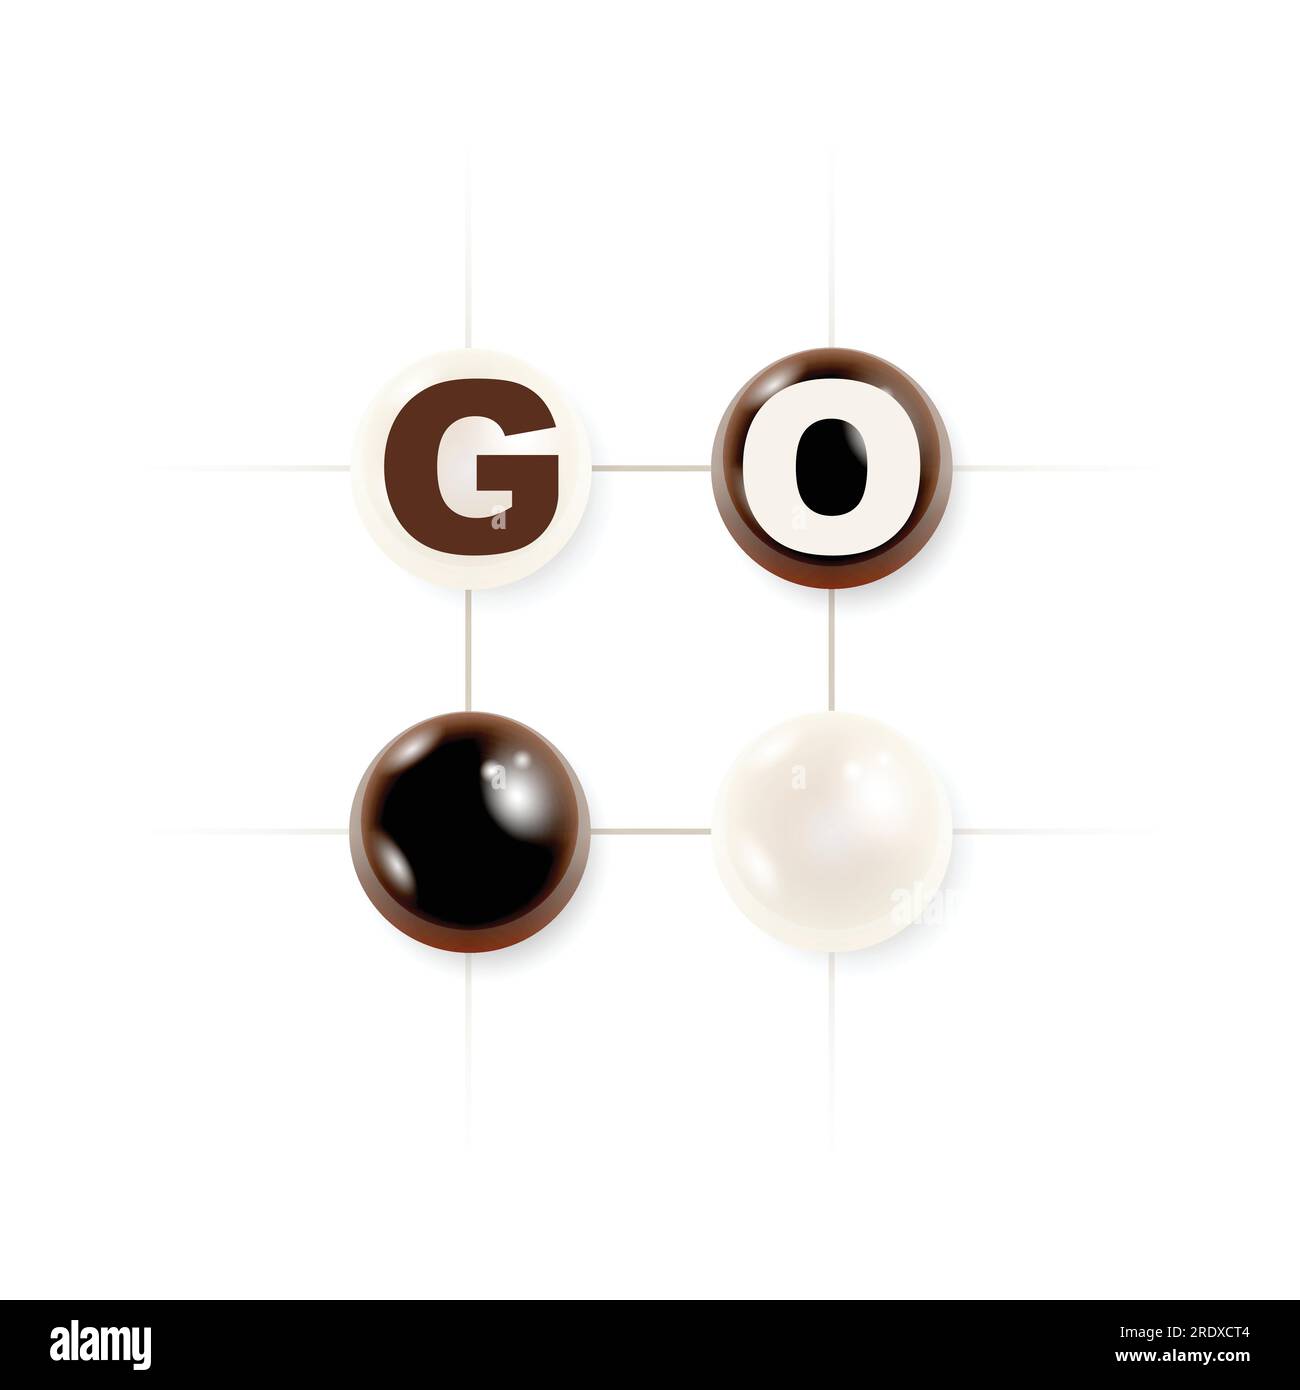 Go game board with shine stones text Stock Vector